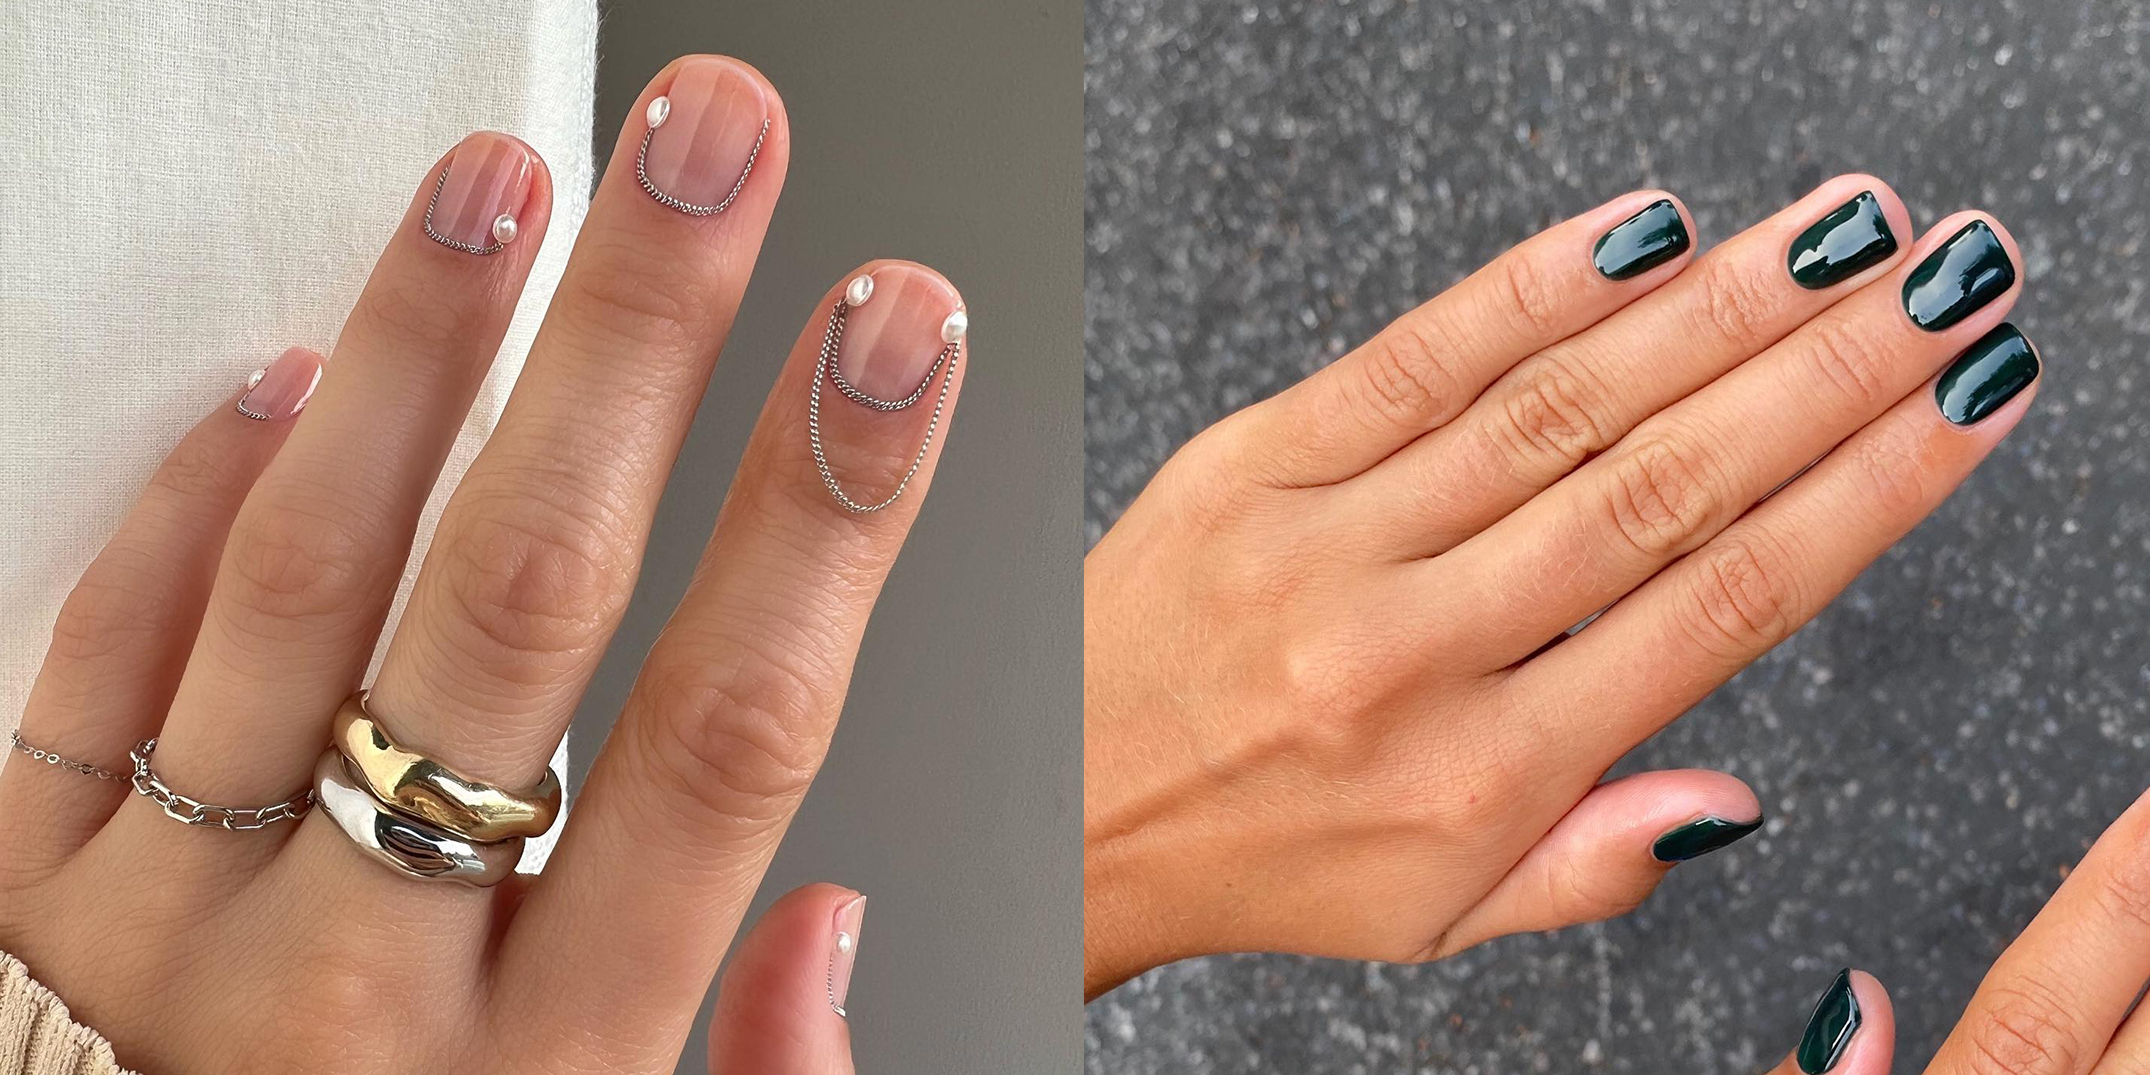 Fingernail Ridges 2022: What Causes Them and How to Get Rid of Them